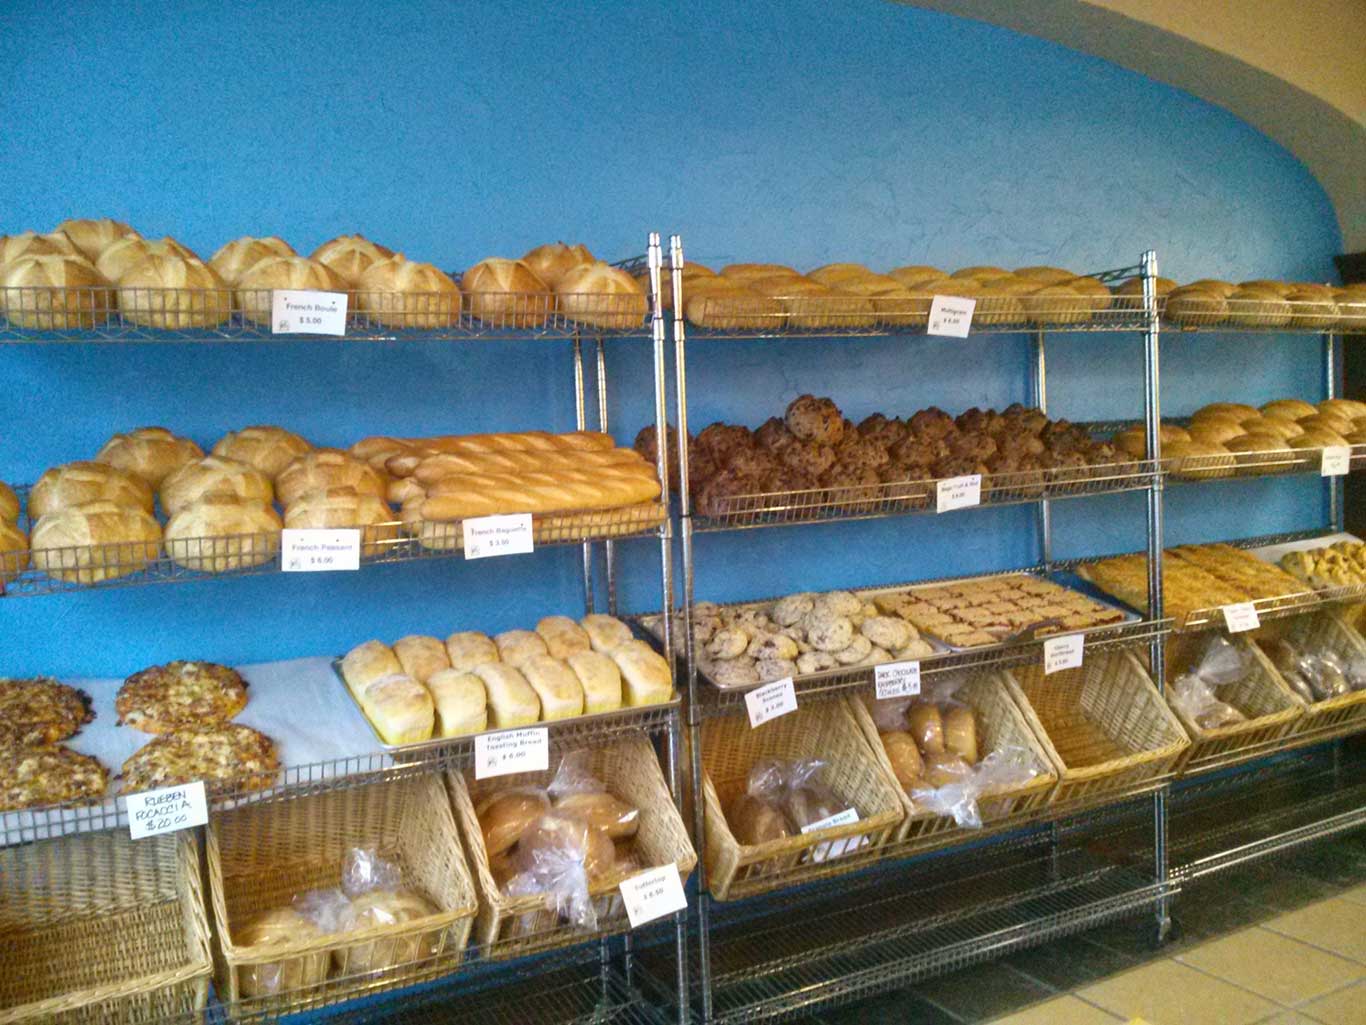 &lt;strong&gt;BREADS OF FAIRLAWN&lt;/strong&gt;&lt;p&gt;Find out more »&lt;/p&gt;